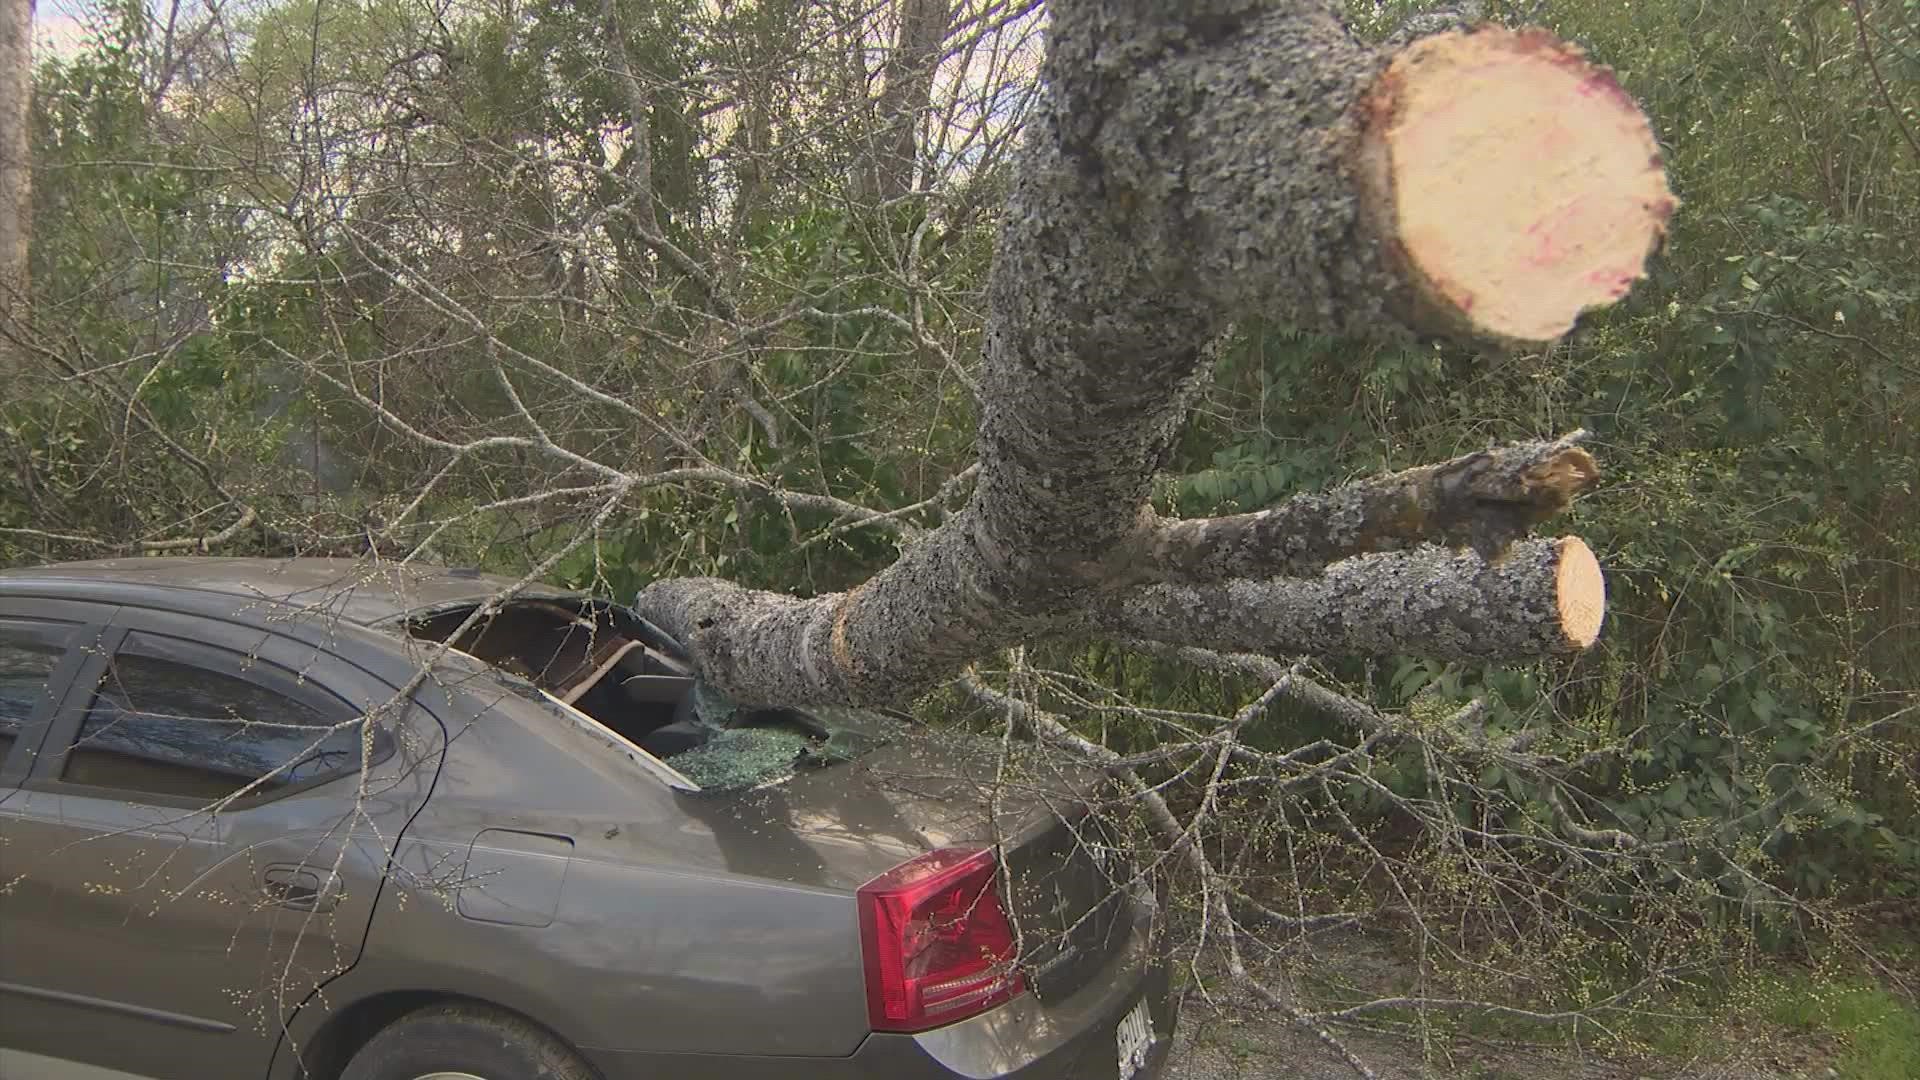 Madisonville was one of several Texas towns devastated by tornadoes as severe storms moved through late Monday night.